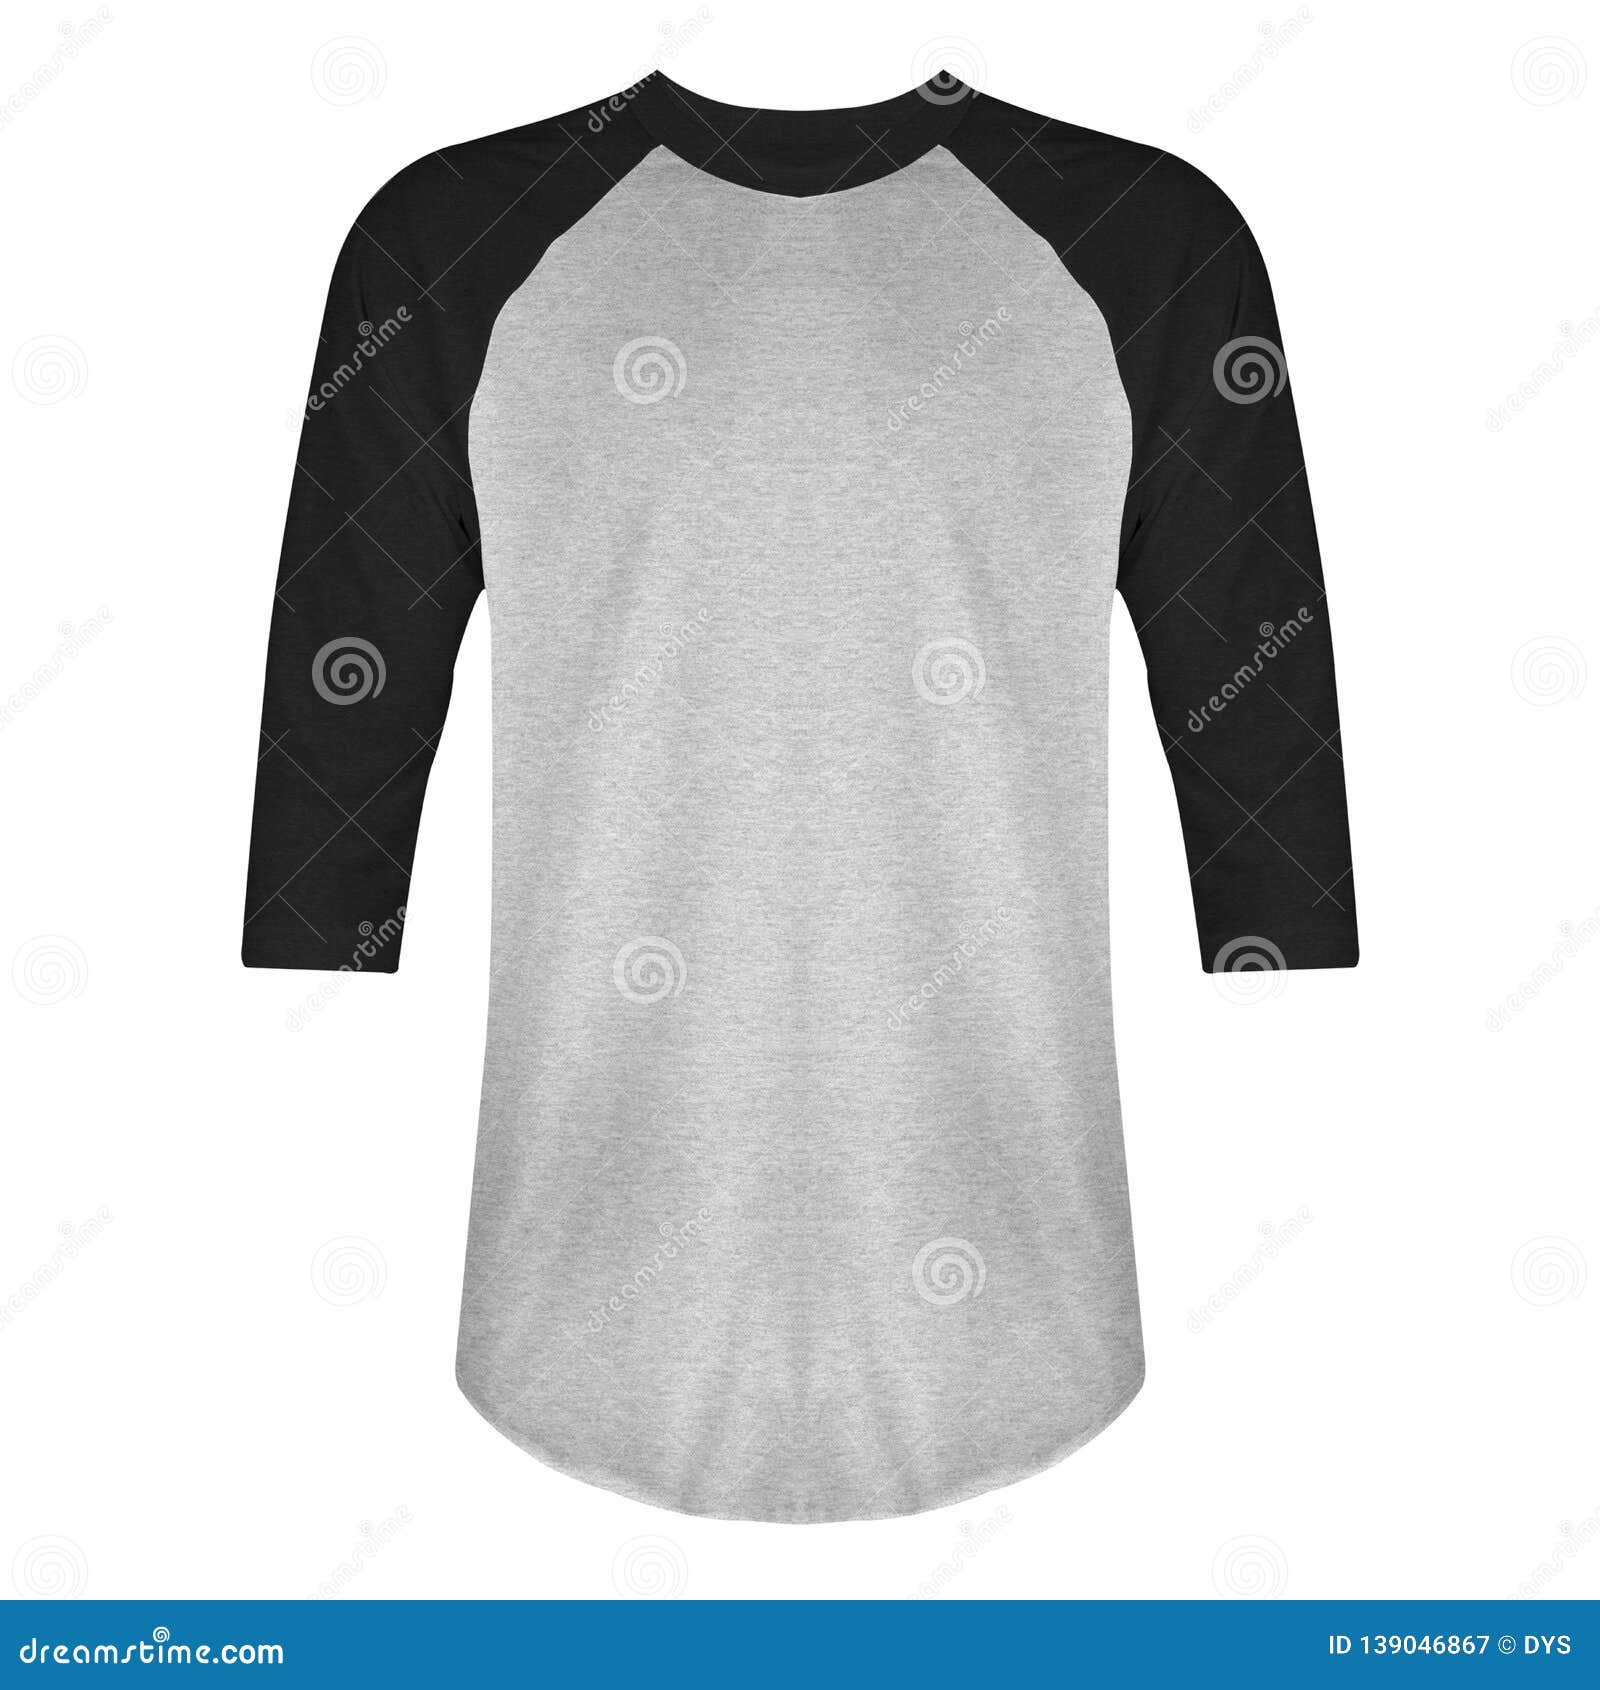 Download Blank T Shirt Raglan 3 4 Sleeves Front View With Black Heather Grey Color Isolated On White Background Ready For Mockup Template Stock Image Image Of Apparel Presentation 139046867